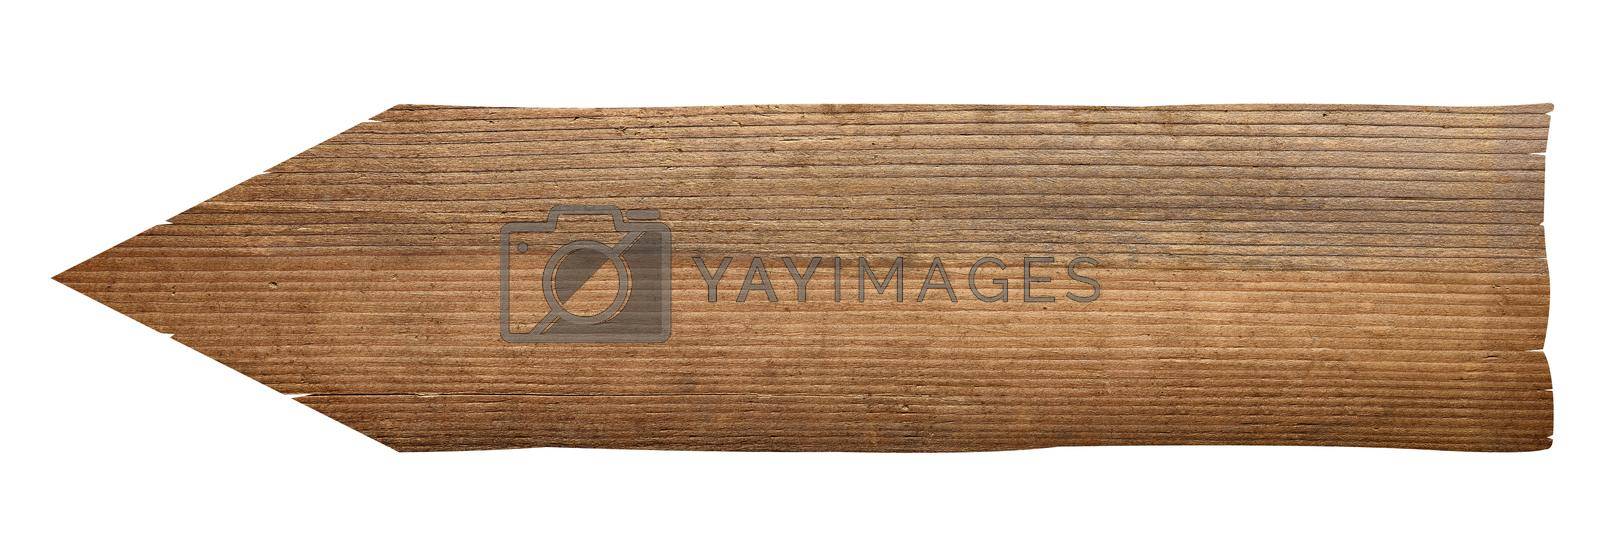 Royalty free image of wood wooden sign background texture old by Picsfive